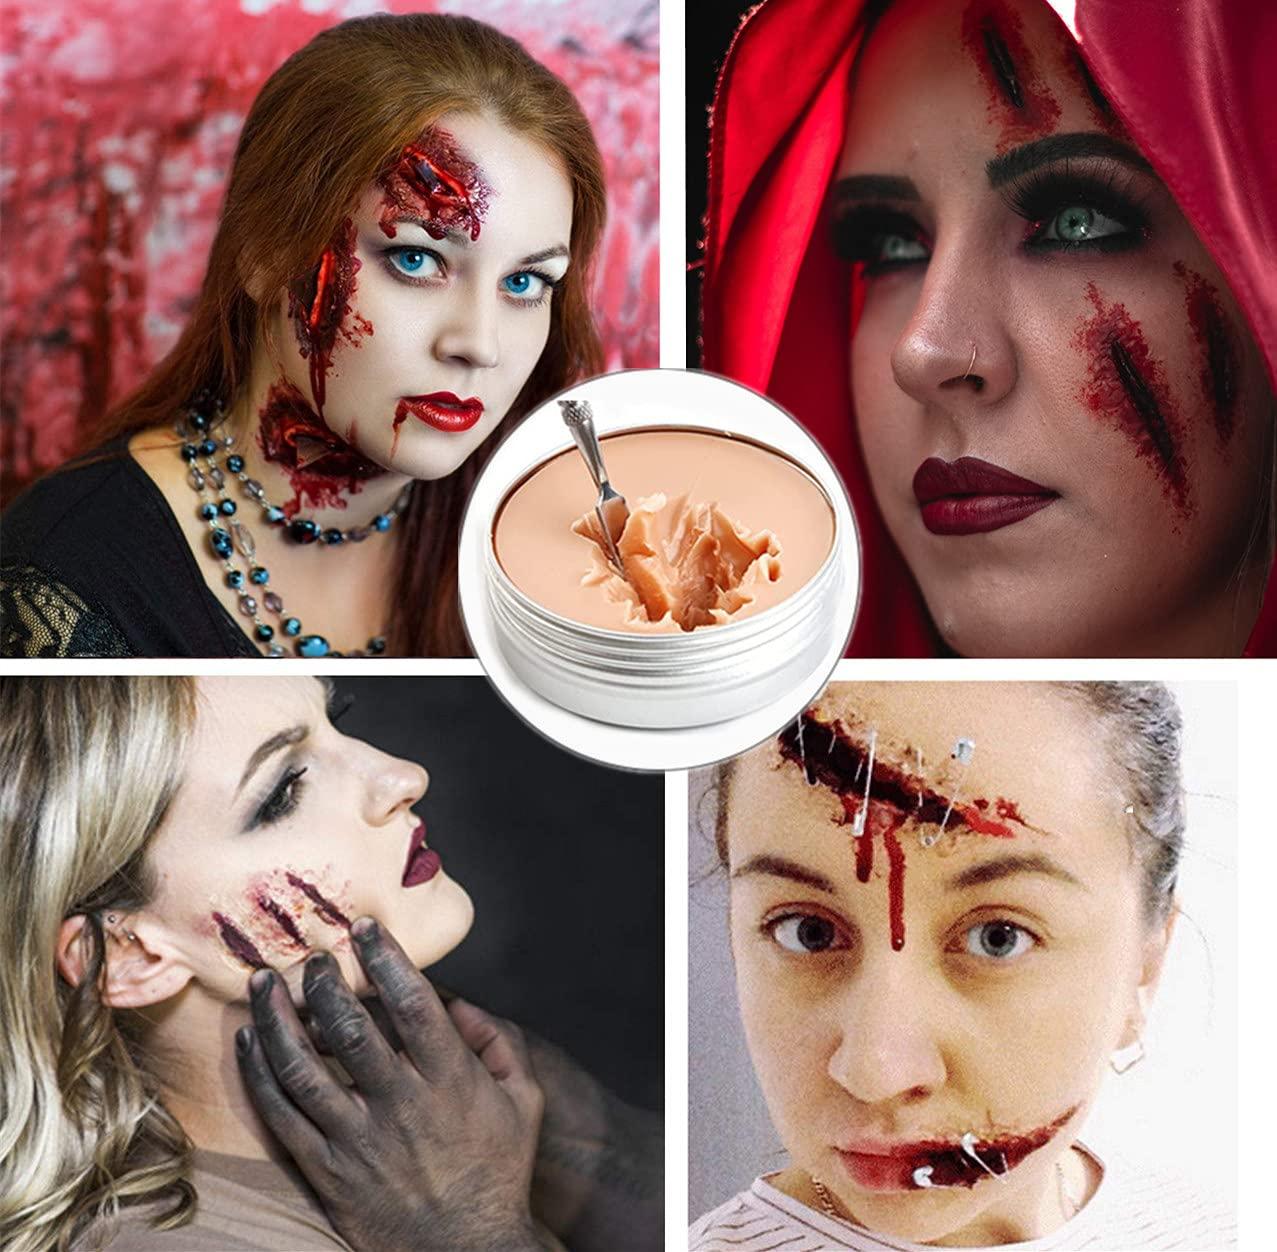 Halloween Makeup Wax For Special Effects Fake Scar Skin Body